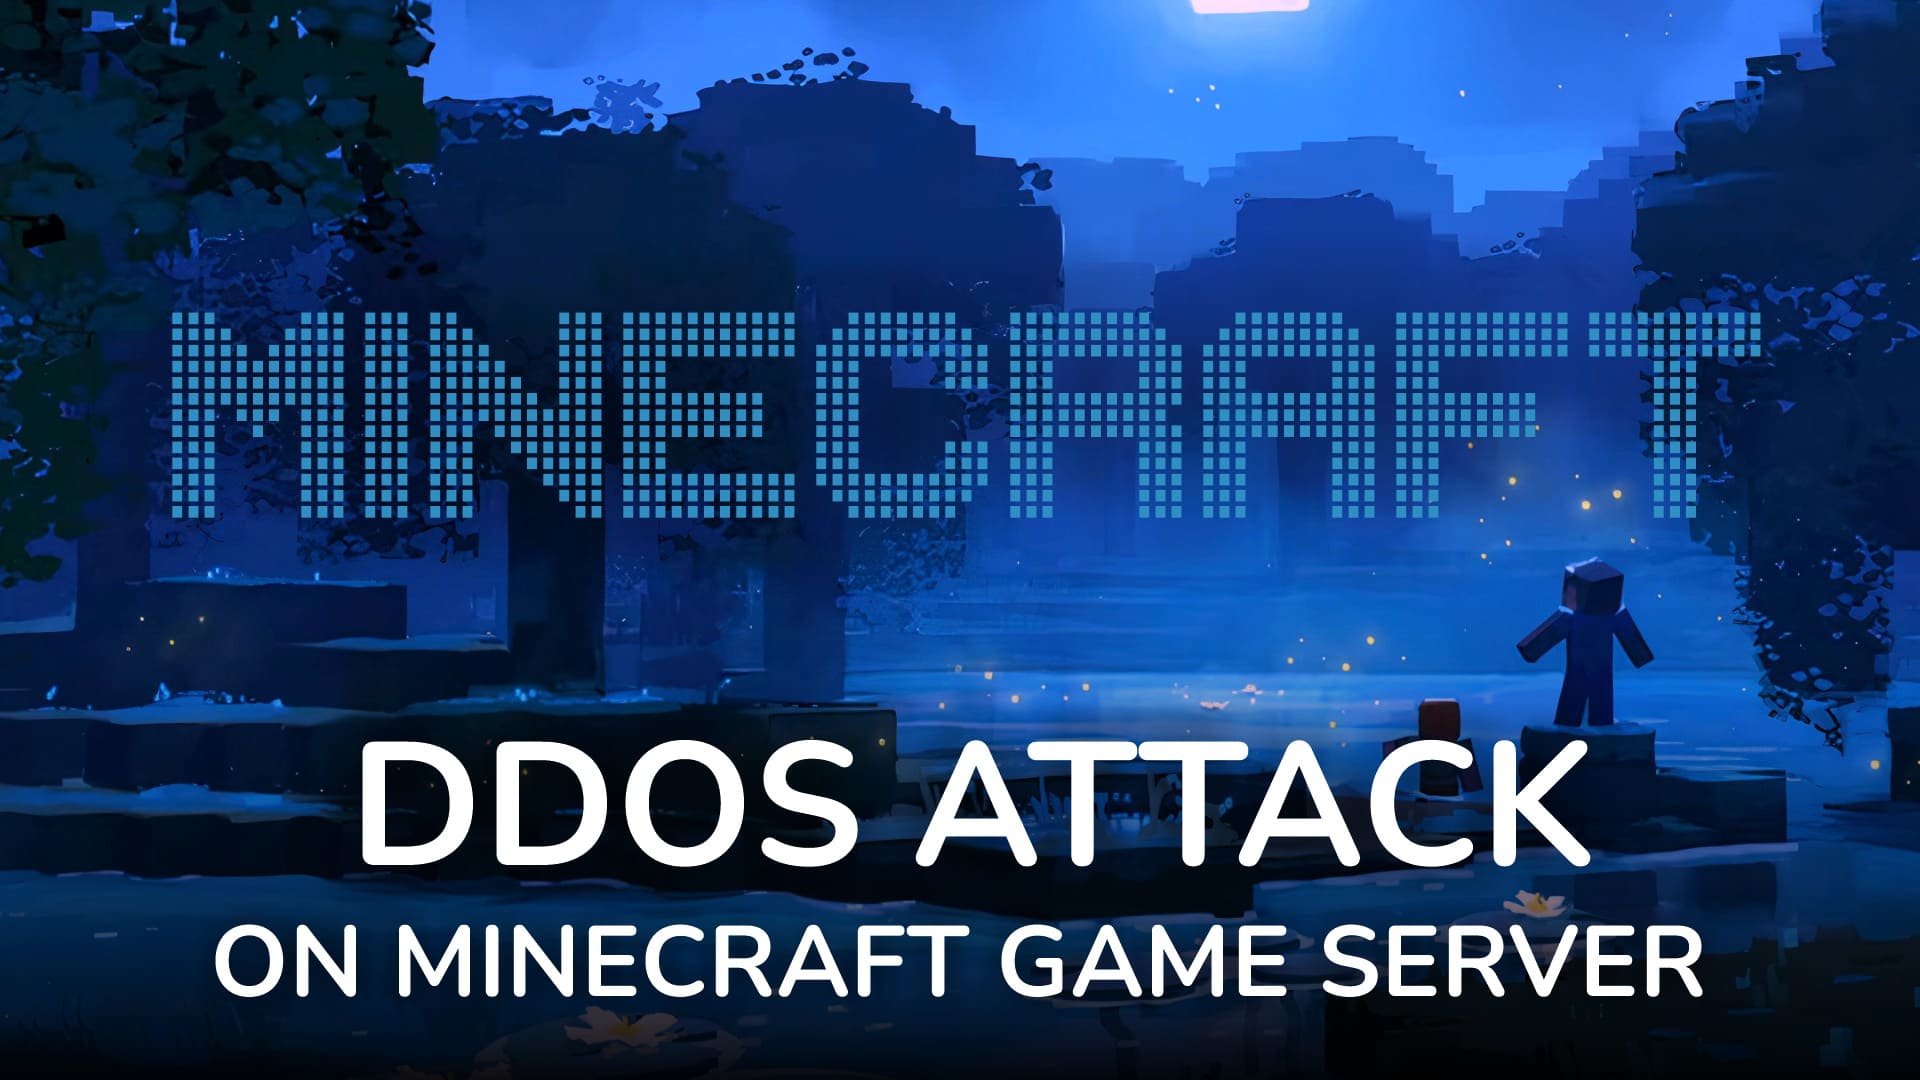 How to DDoS Minecraft, FiveM and other game servers - MAXSTRESSER